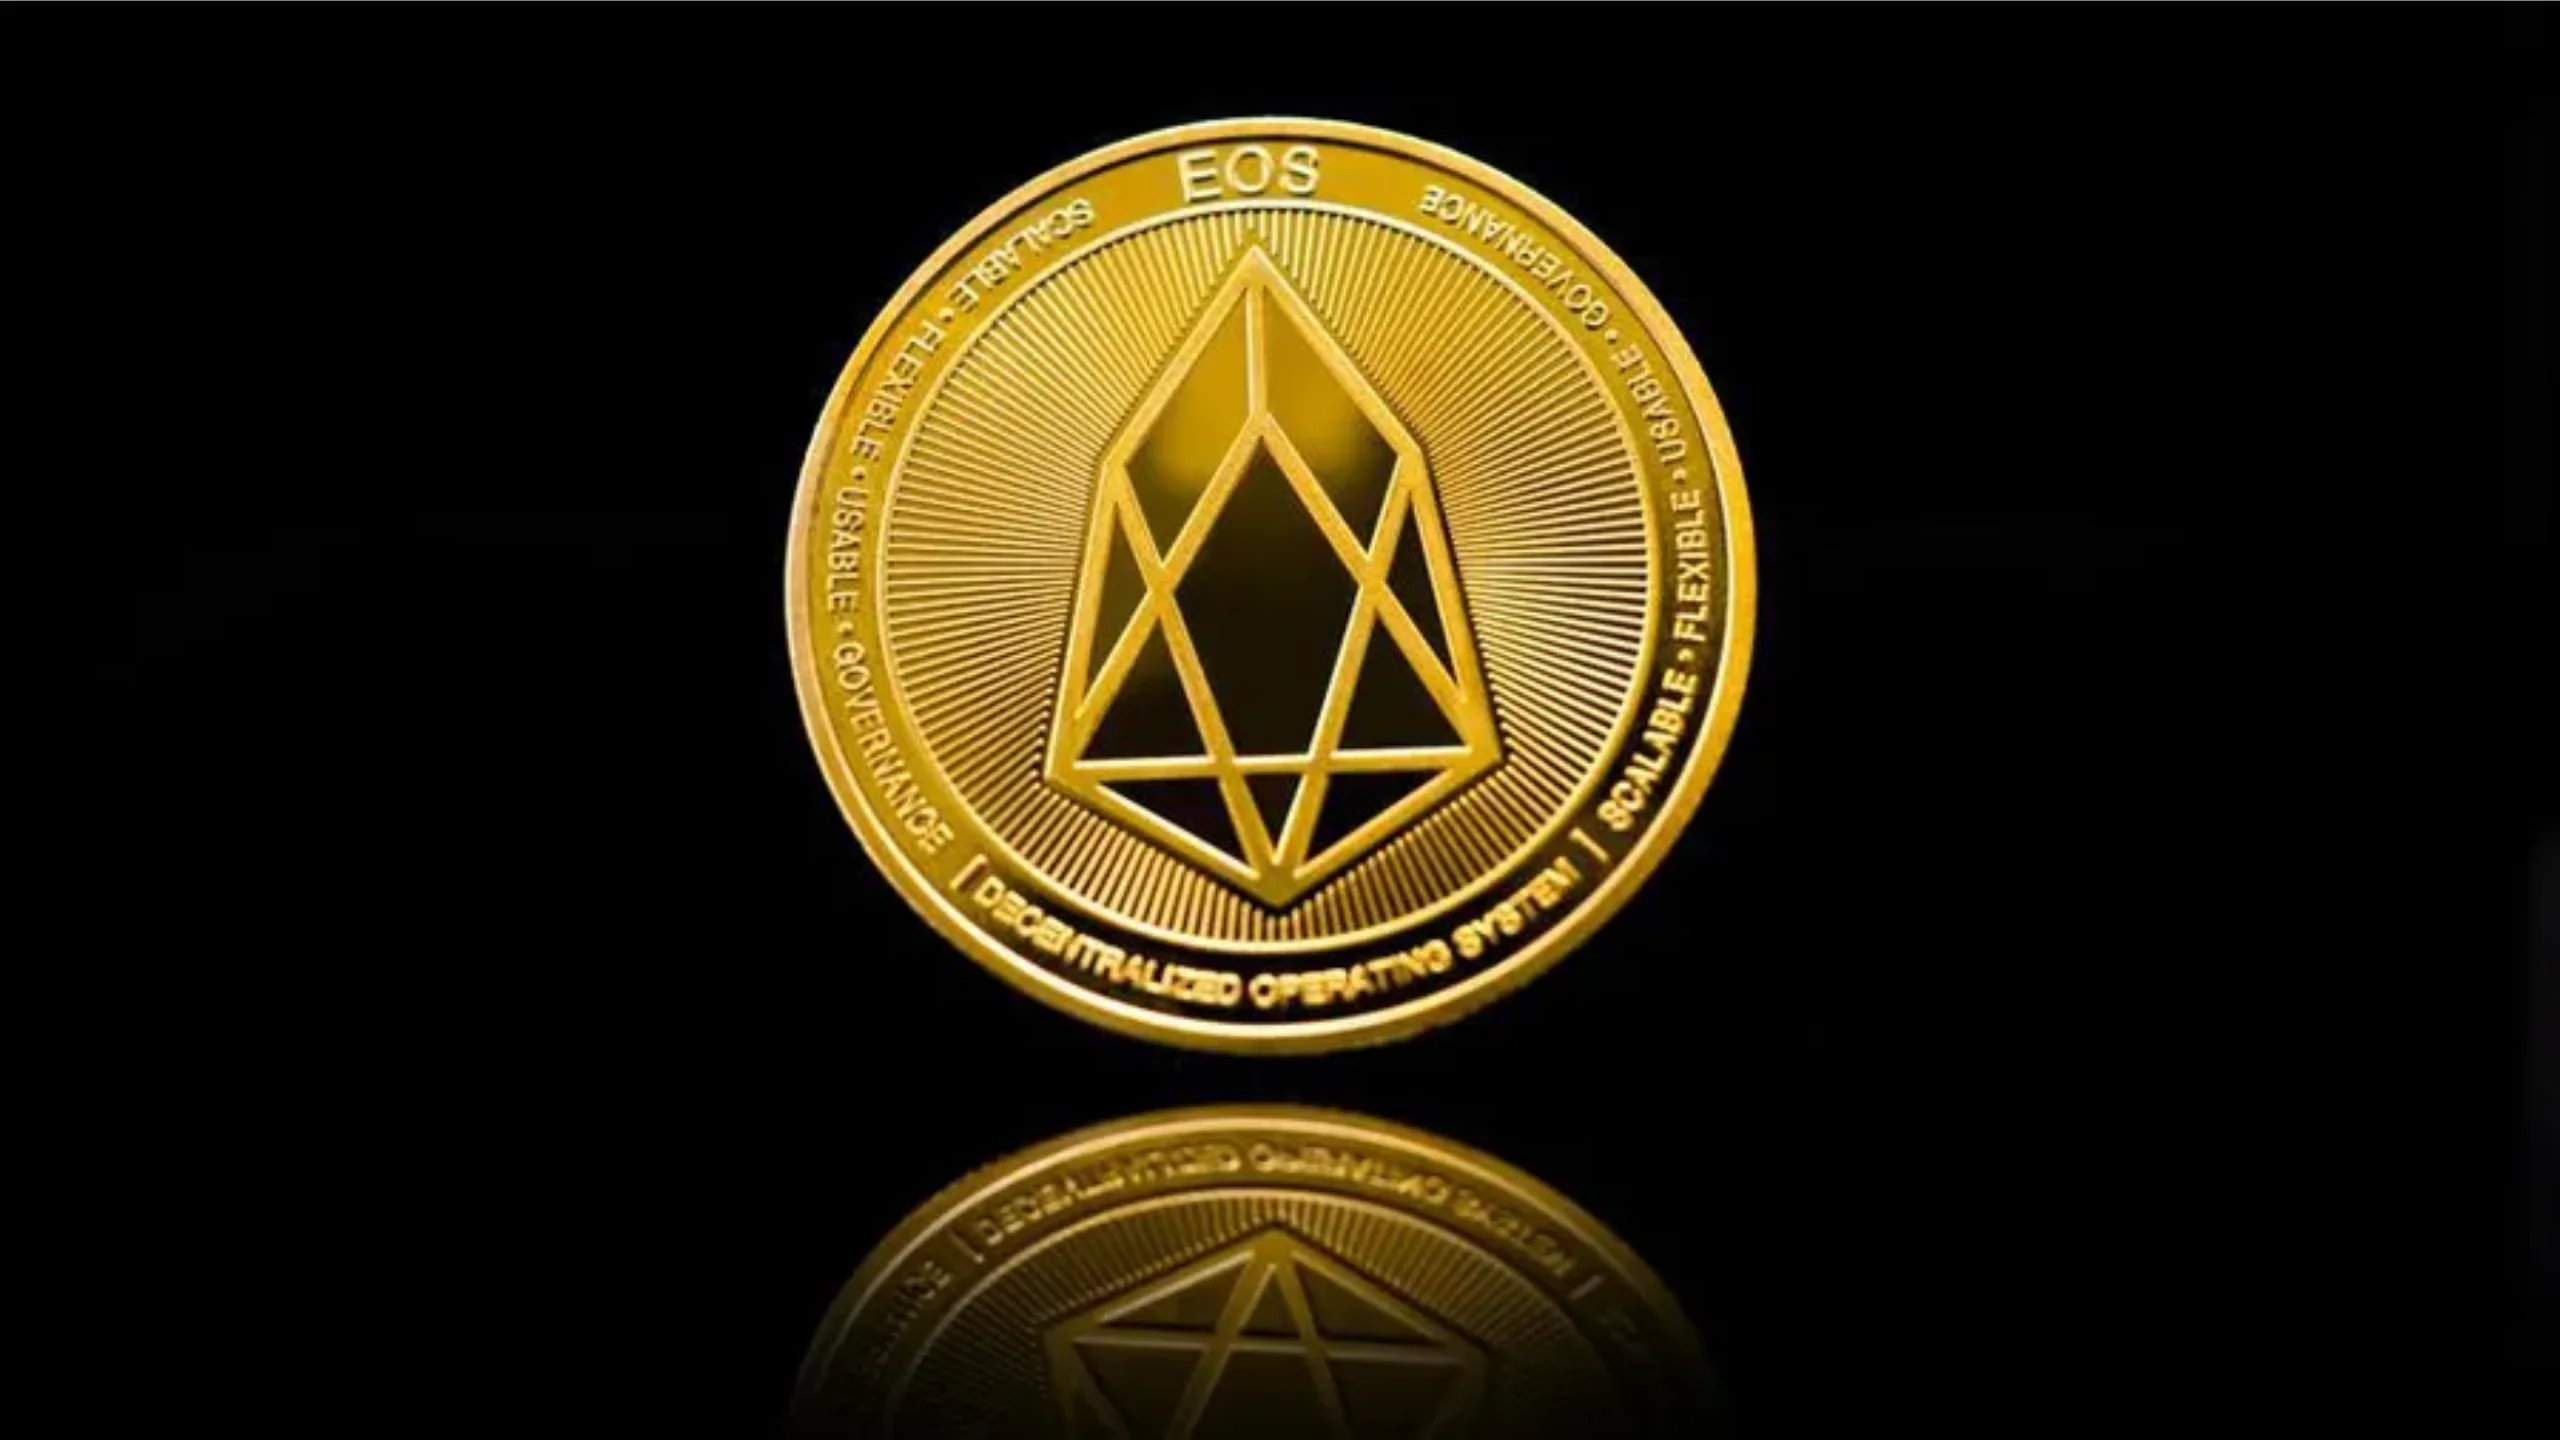 EOS.IO logo representing the blockchain platform designed for the development and execution of decentralized applications. EOS.IO aims to offer scalability, flexibility, and user-friendly experiences with minimal transaction fees.